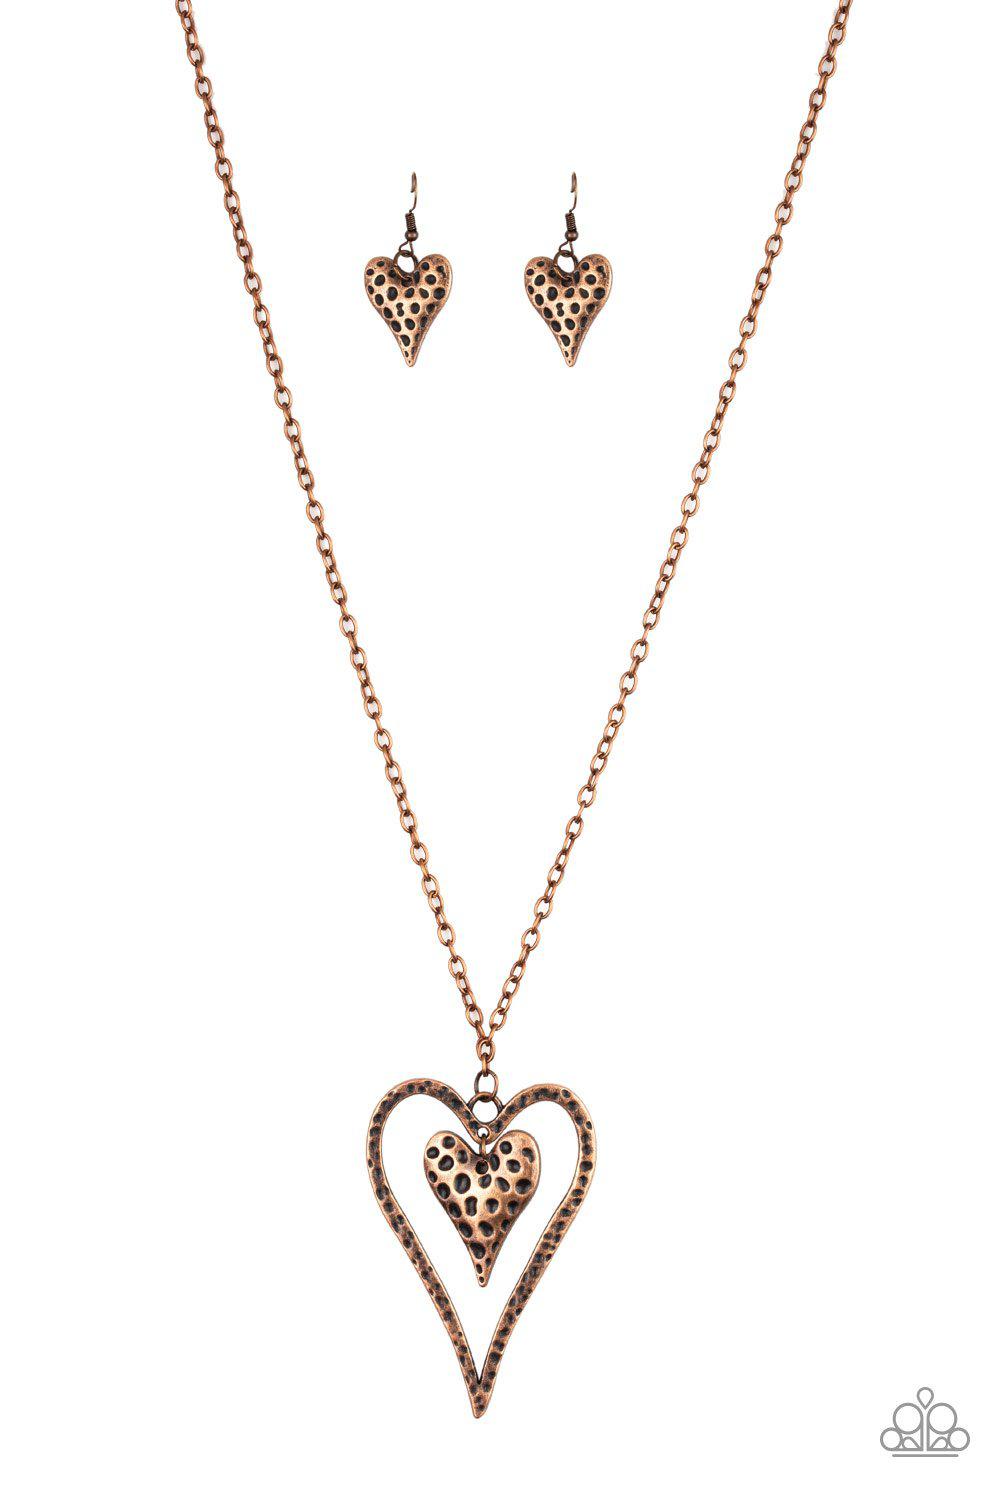 Hardened Hearts Long Copper Necklace and matching Earrings - Paparazzi Accessories-CarasShop.com - $5 Jewelry by Cara Jewels